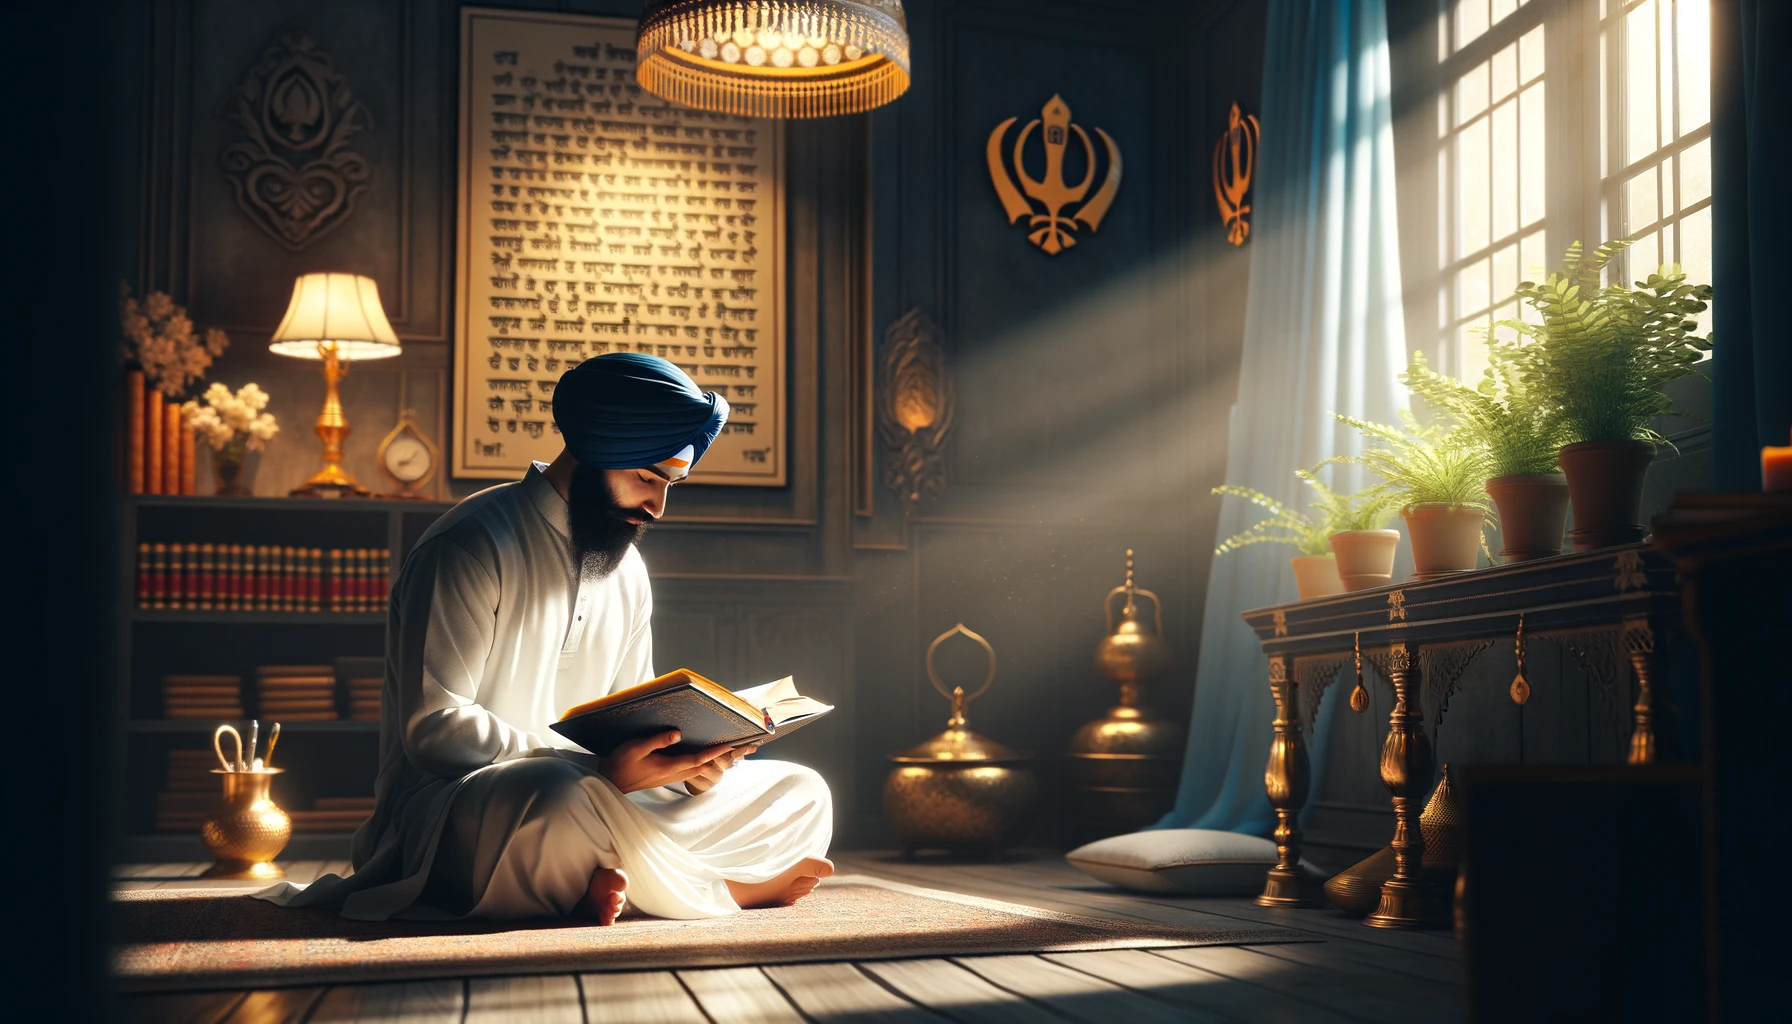 Sikh man engaging in a moment of reflection and reading from the Guru Granth Sahib. The serene room and the gentle light signify enlightenment and the peaceful start of the New Year.